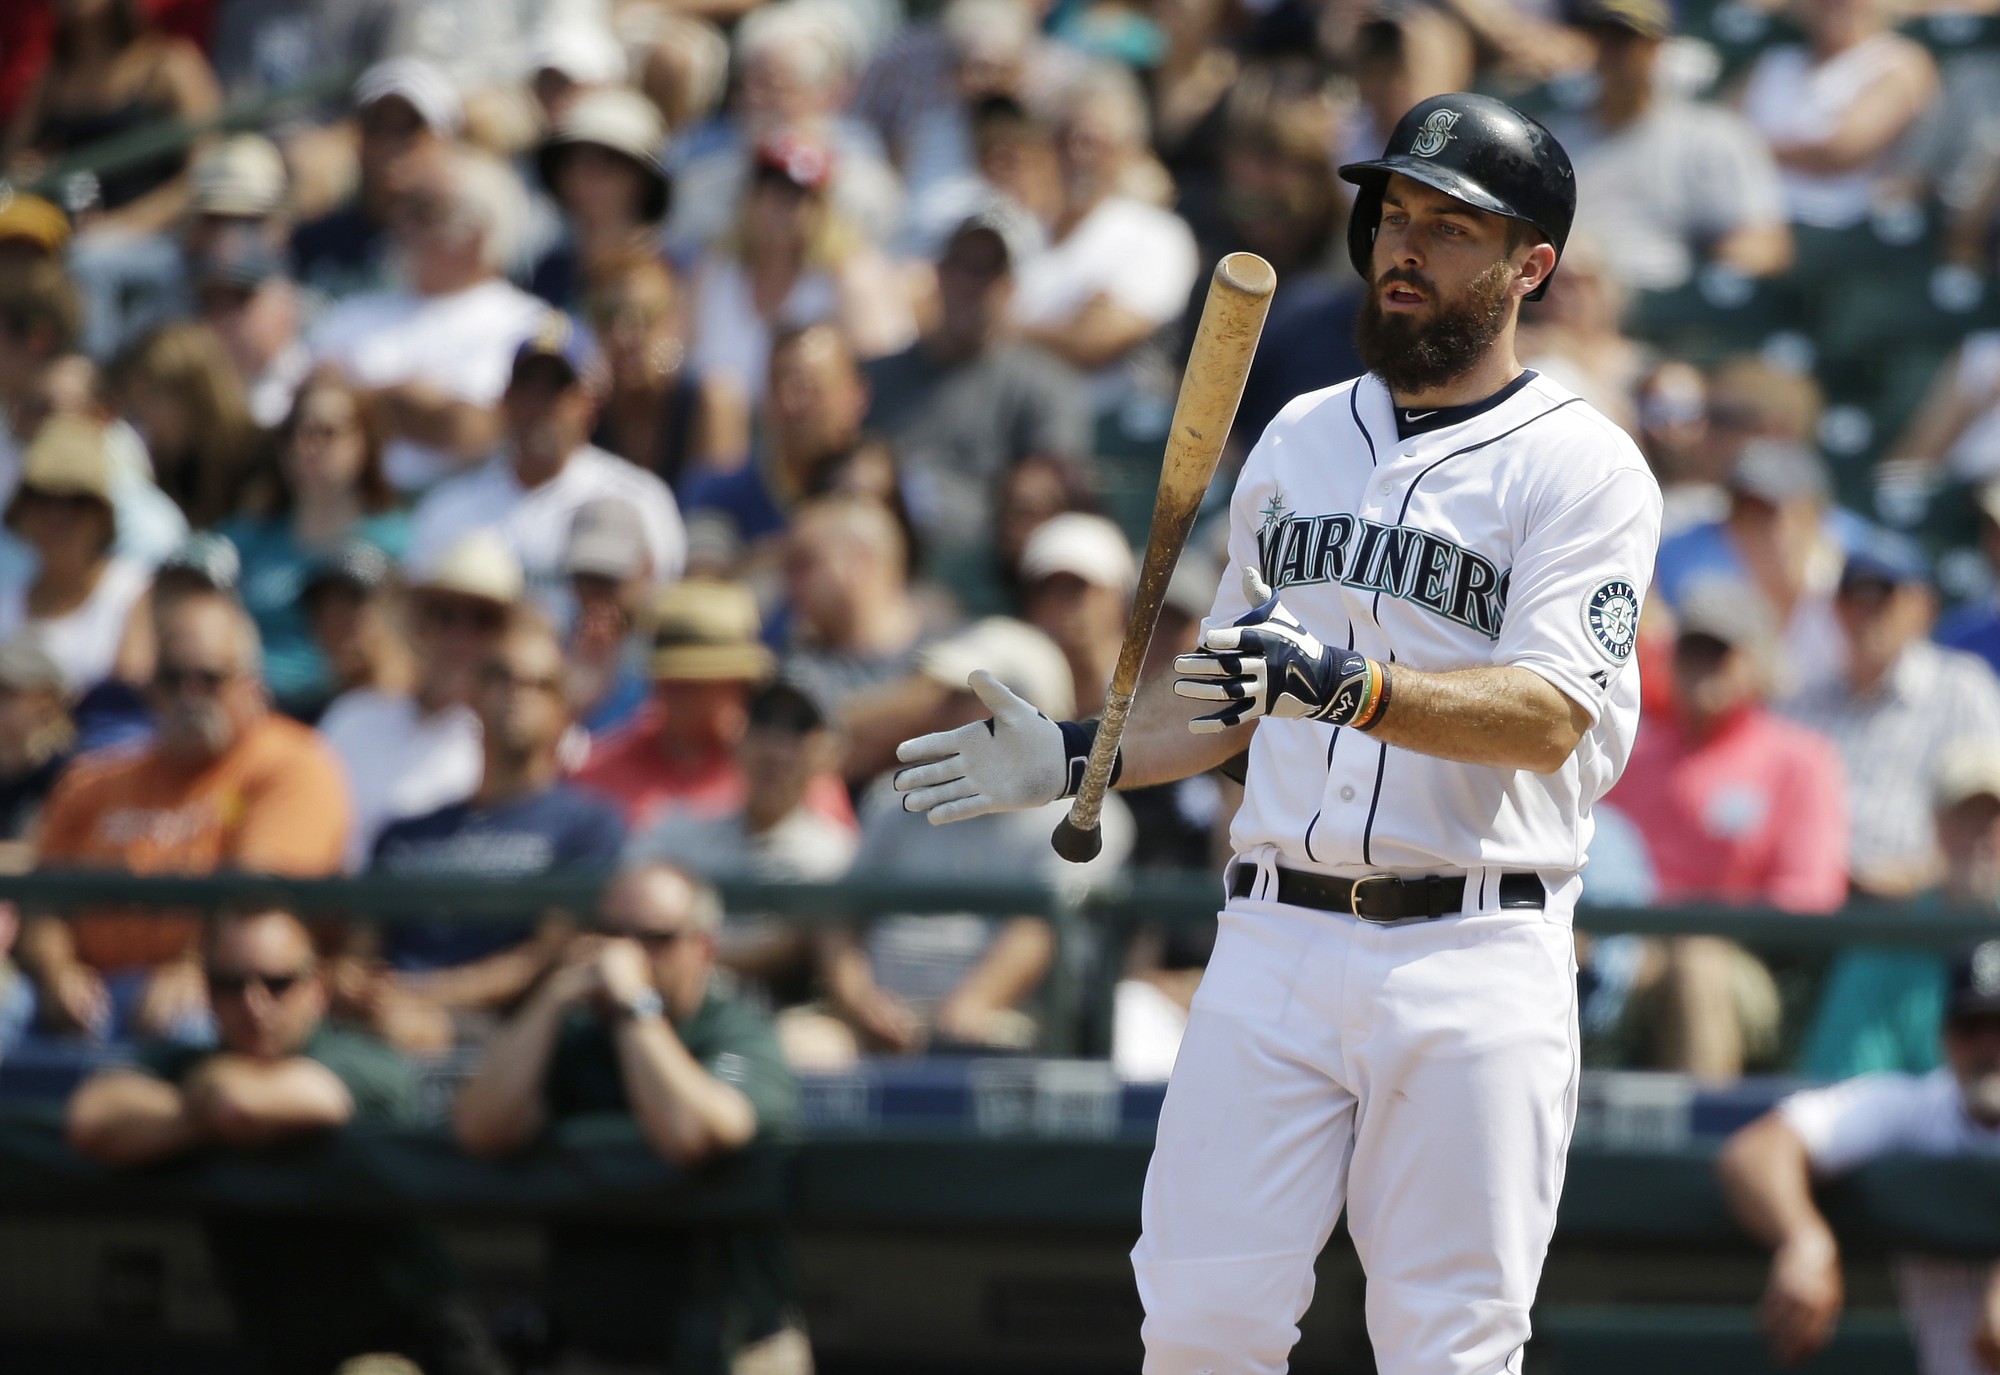 Seattle Mariners' Dustin Ackley tosses his bat after flying out in the seventh inning against the Detroit Tigers, Wednesday, July 8, 2015, in Seattle. The Tigers beat the Mariners 5-4. (AP Photo/Ted S.